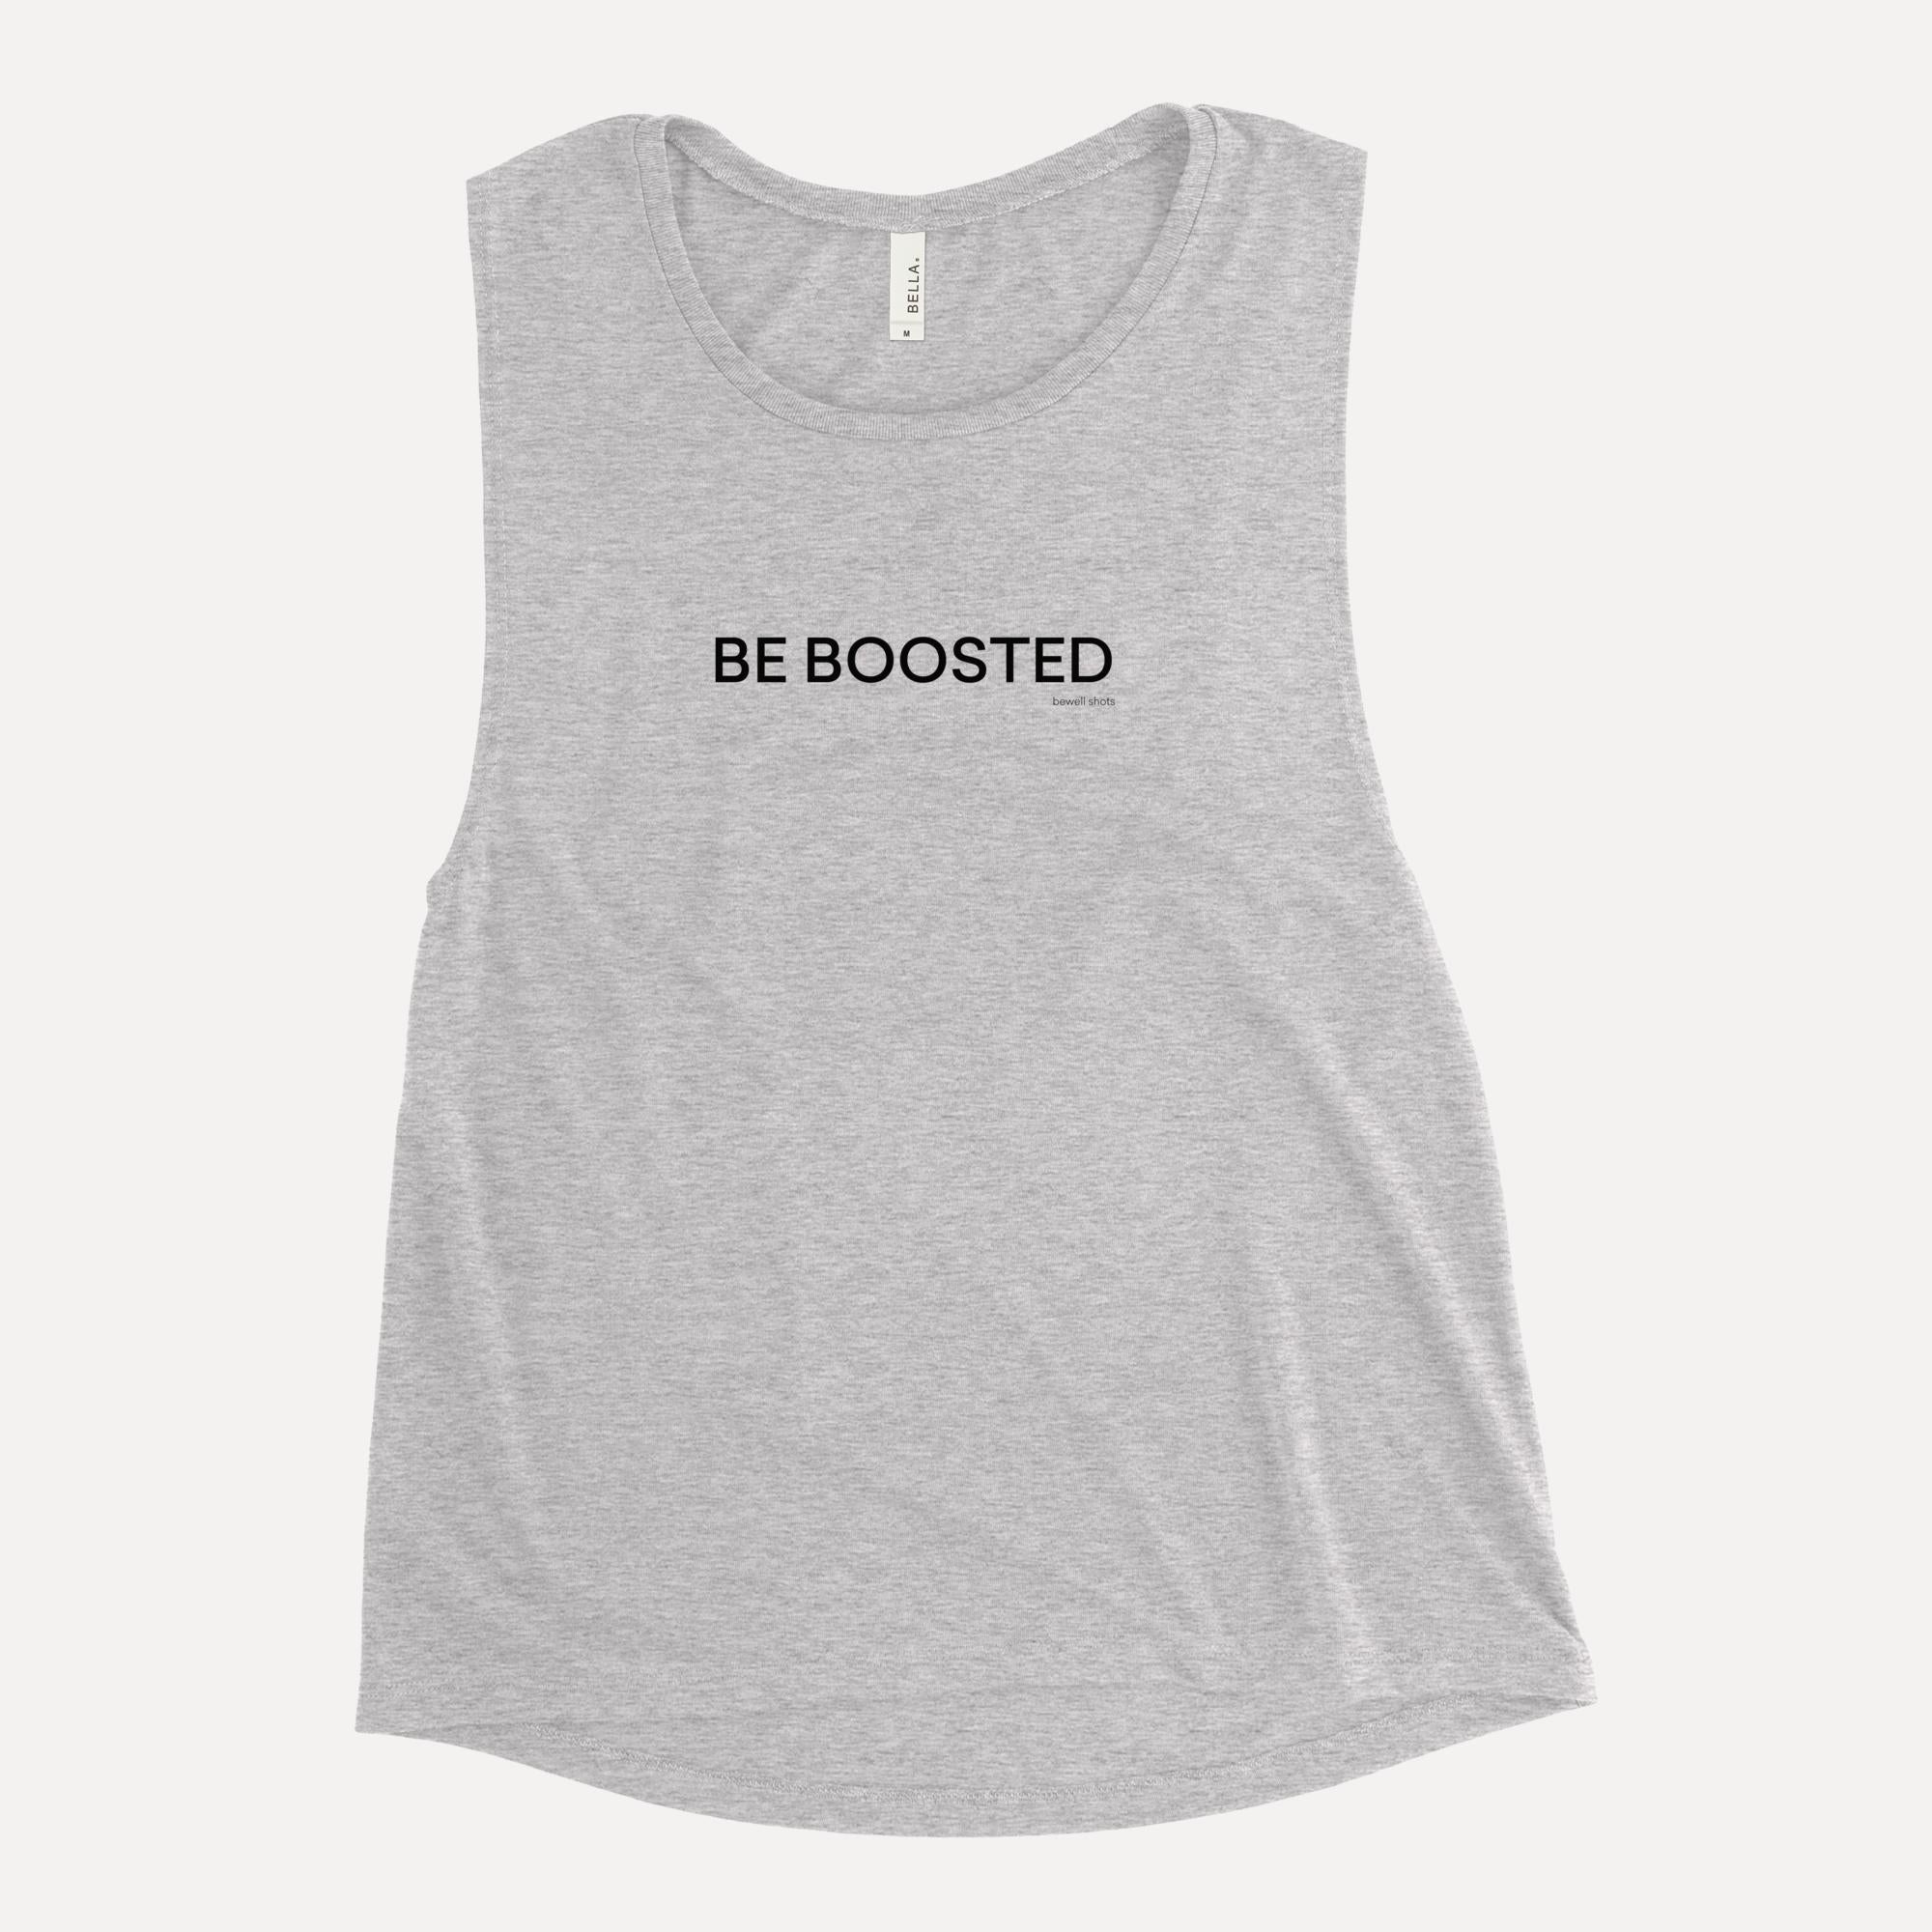 Bewell wellness shots womens muscle tank athletic heather front